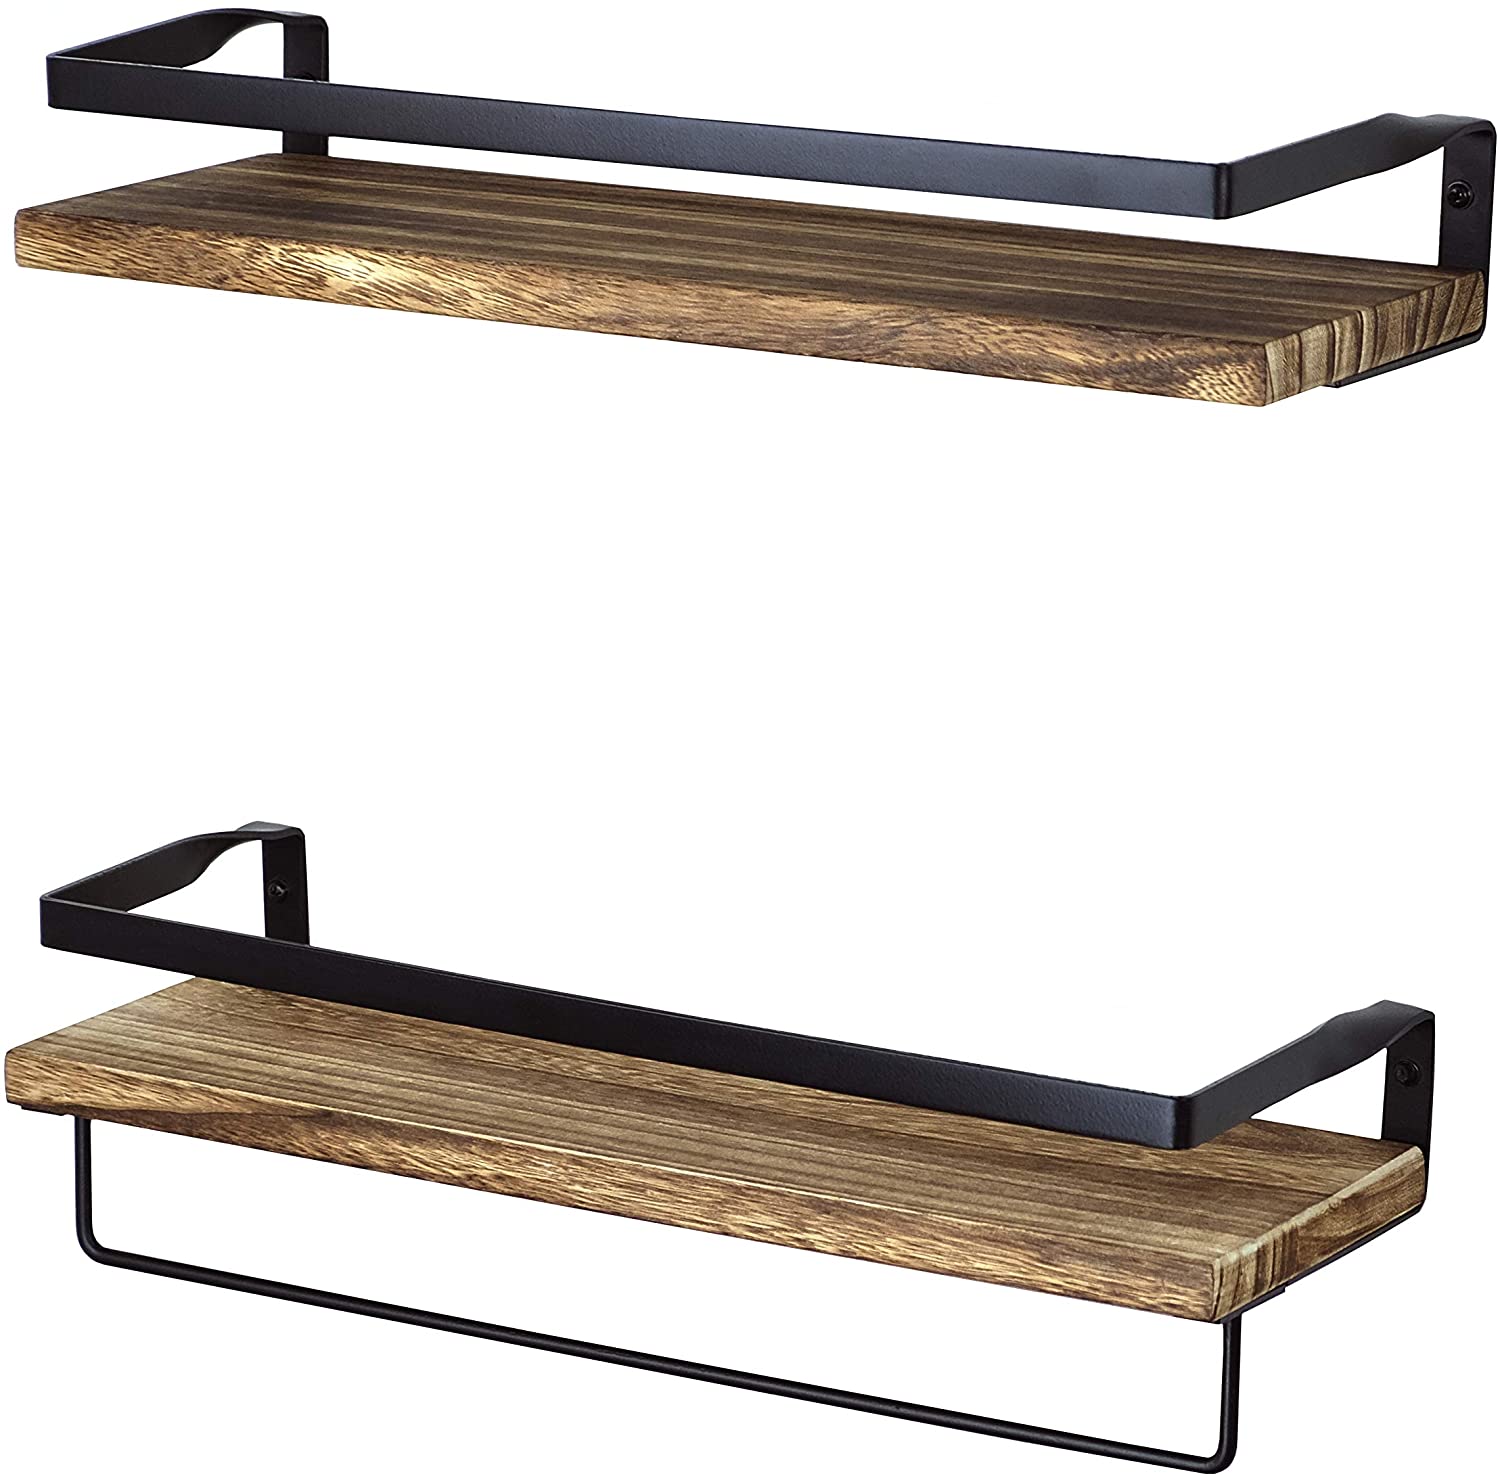 two wooden shelves with black metal details